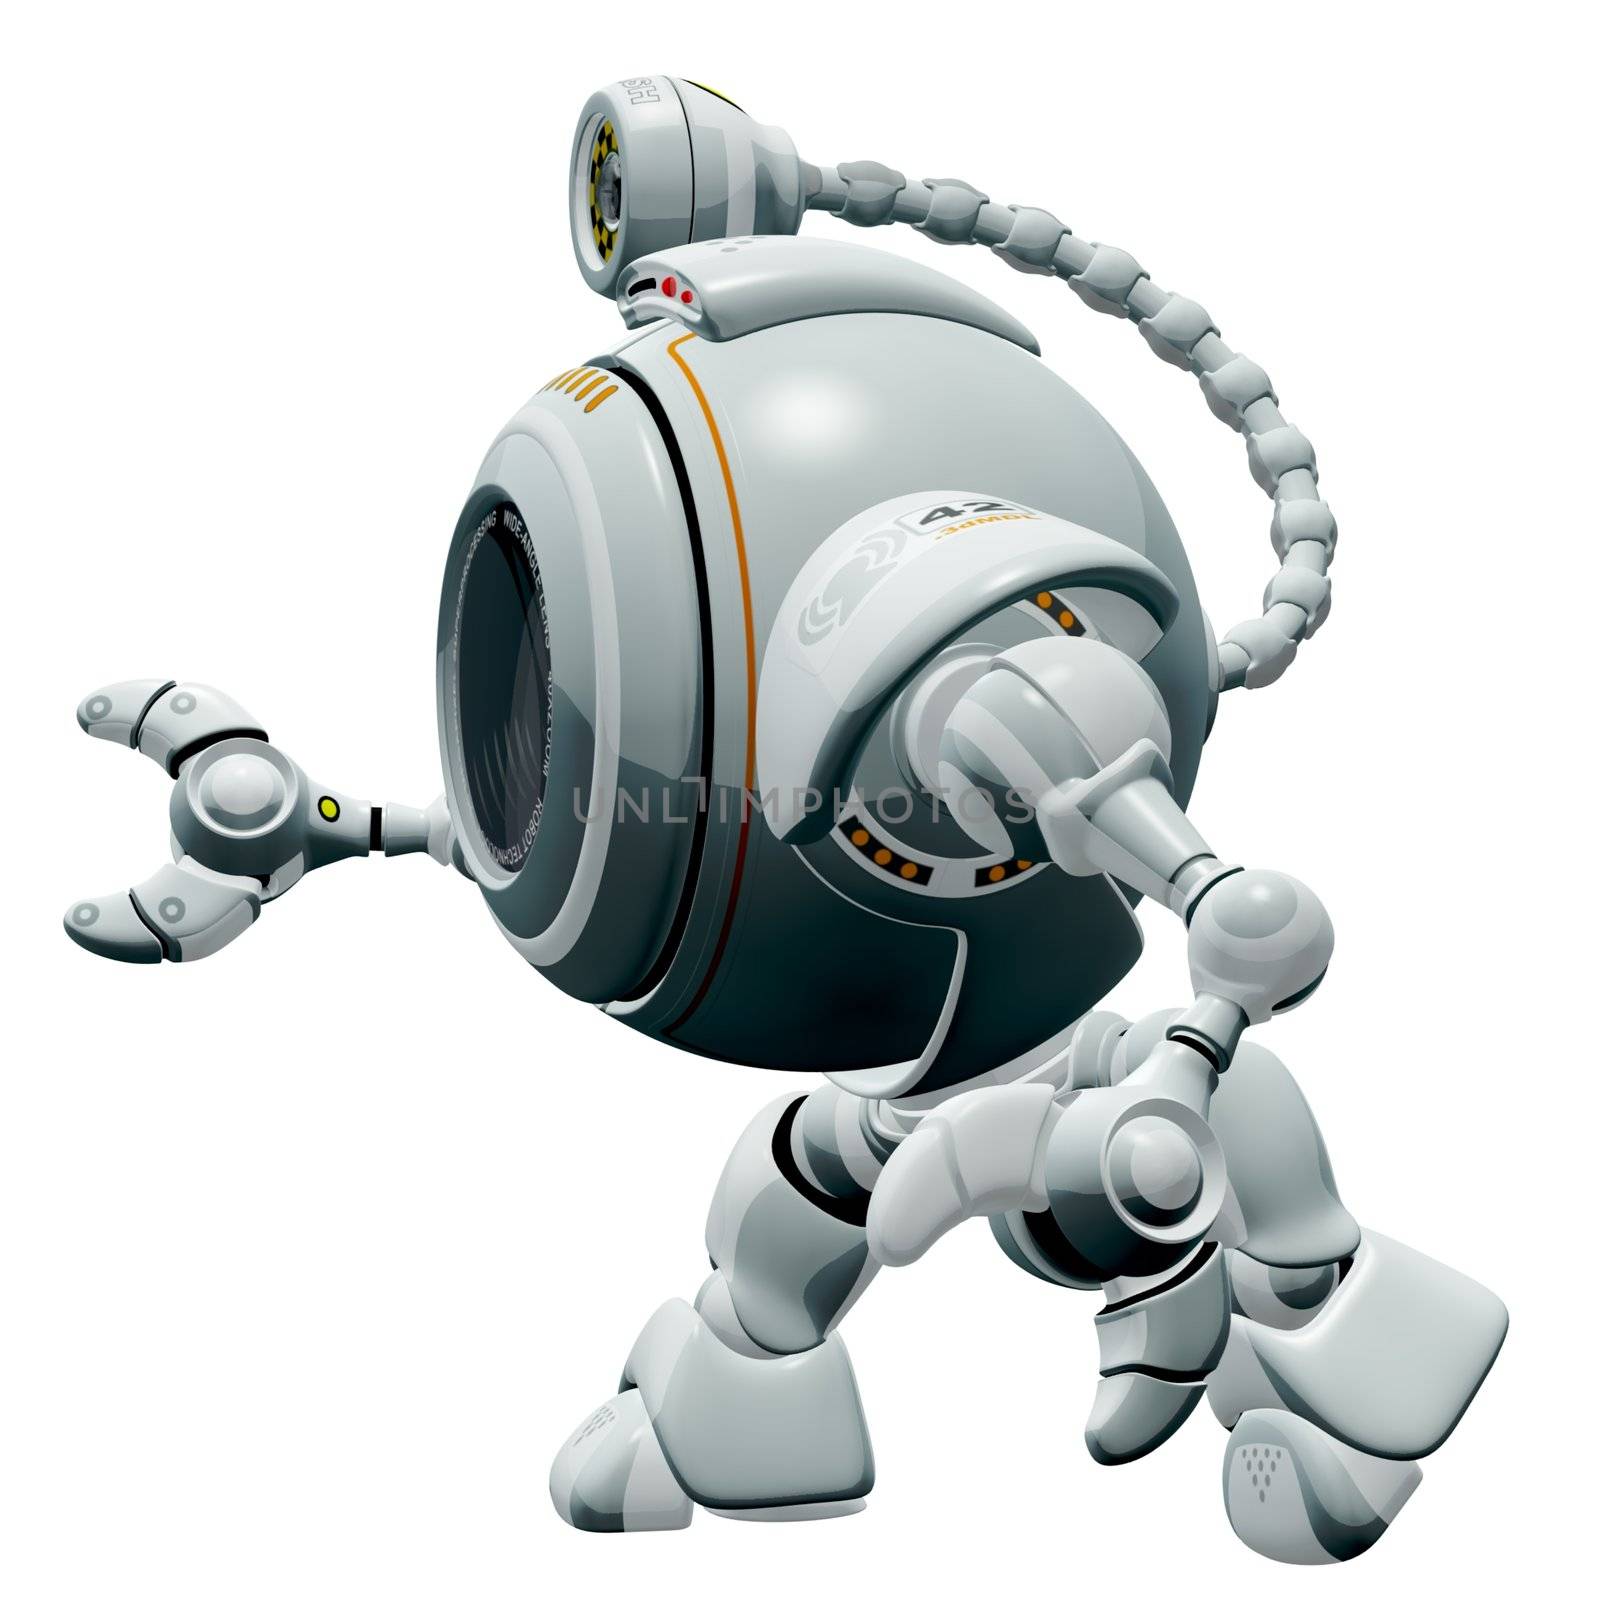 A 3d robot web cam walking side ways in an animated manner. The labels and markings on him are all fictional and made up. 